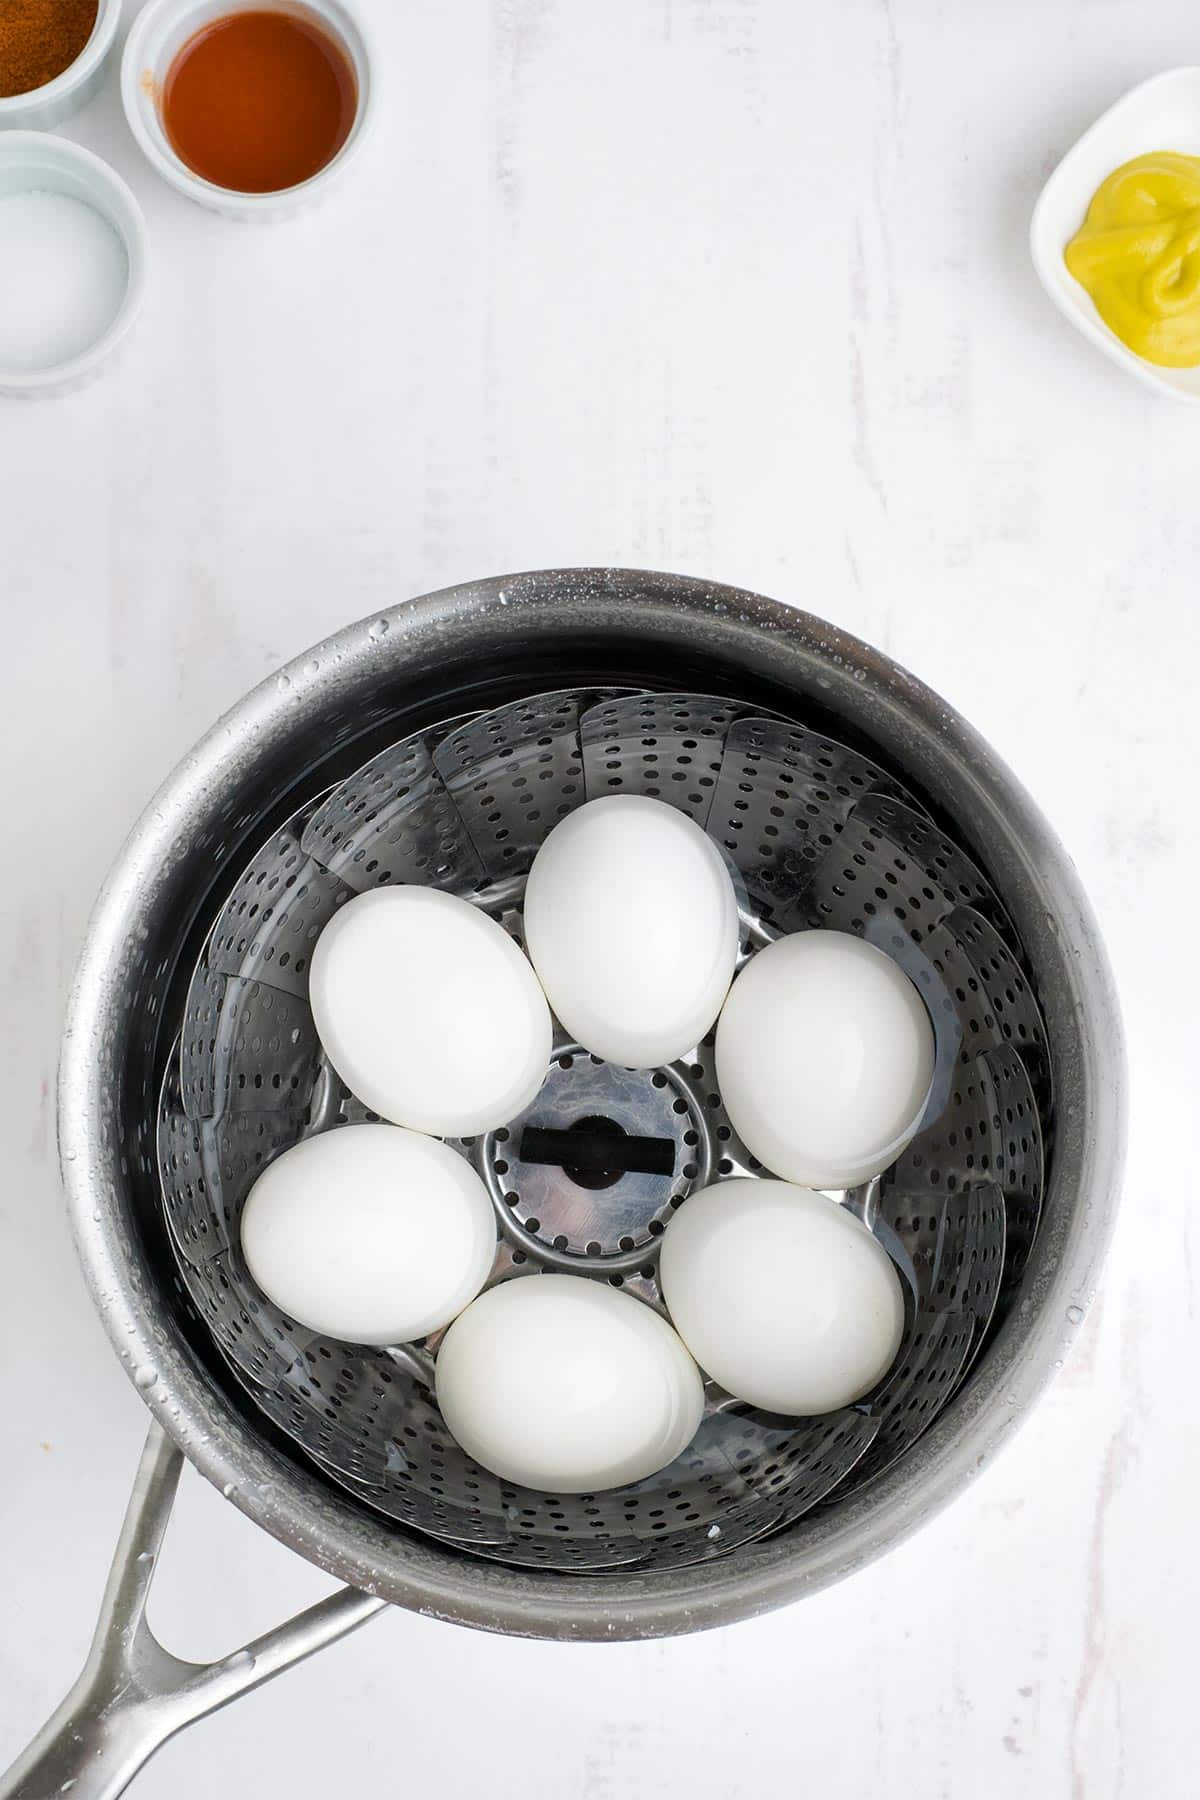 Eggs boiled in a pot.